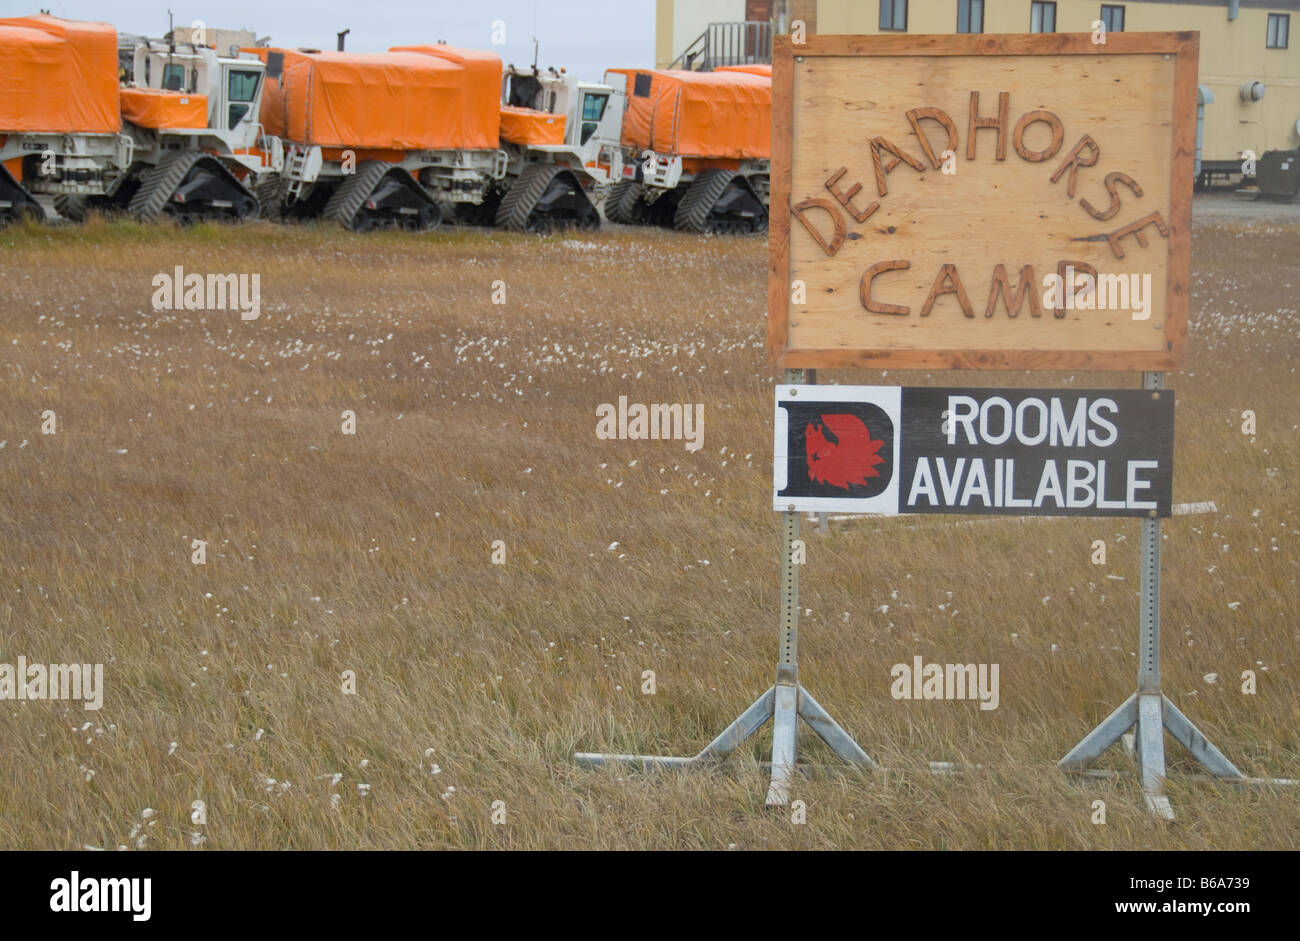 Sign for accommodations at Seismic Exploration Camp, Deadhorse, Alaska Stock Photo